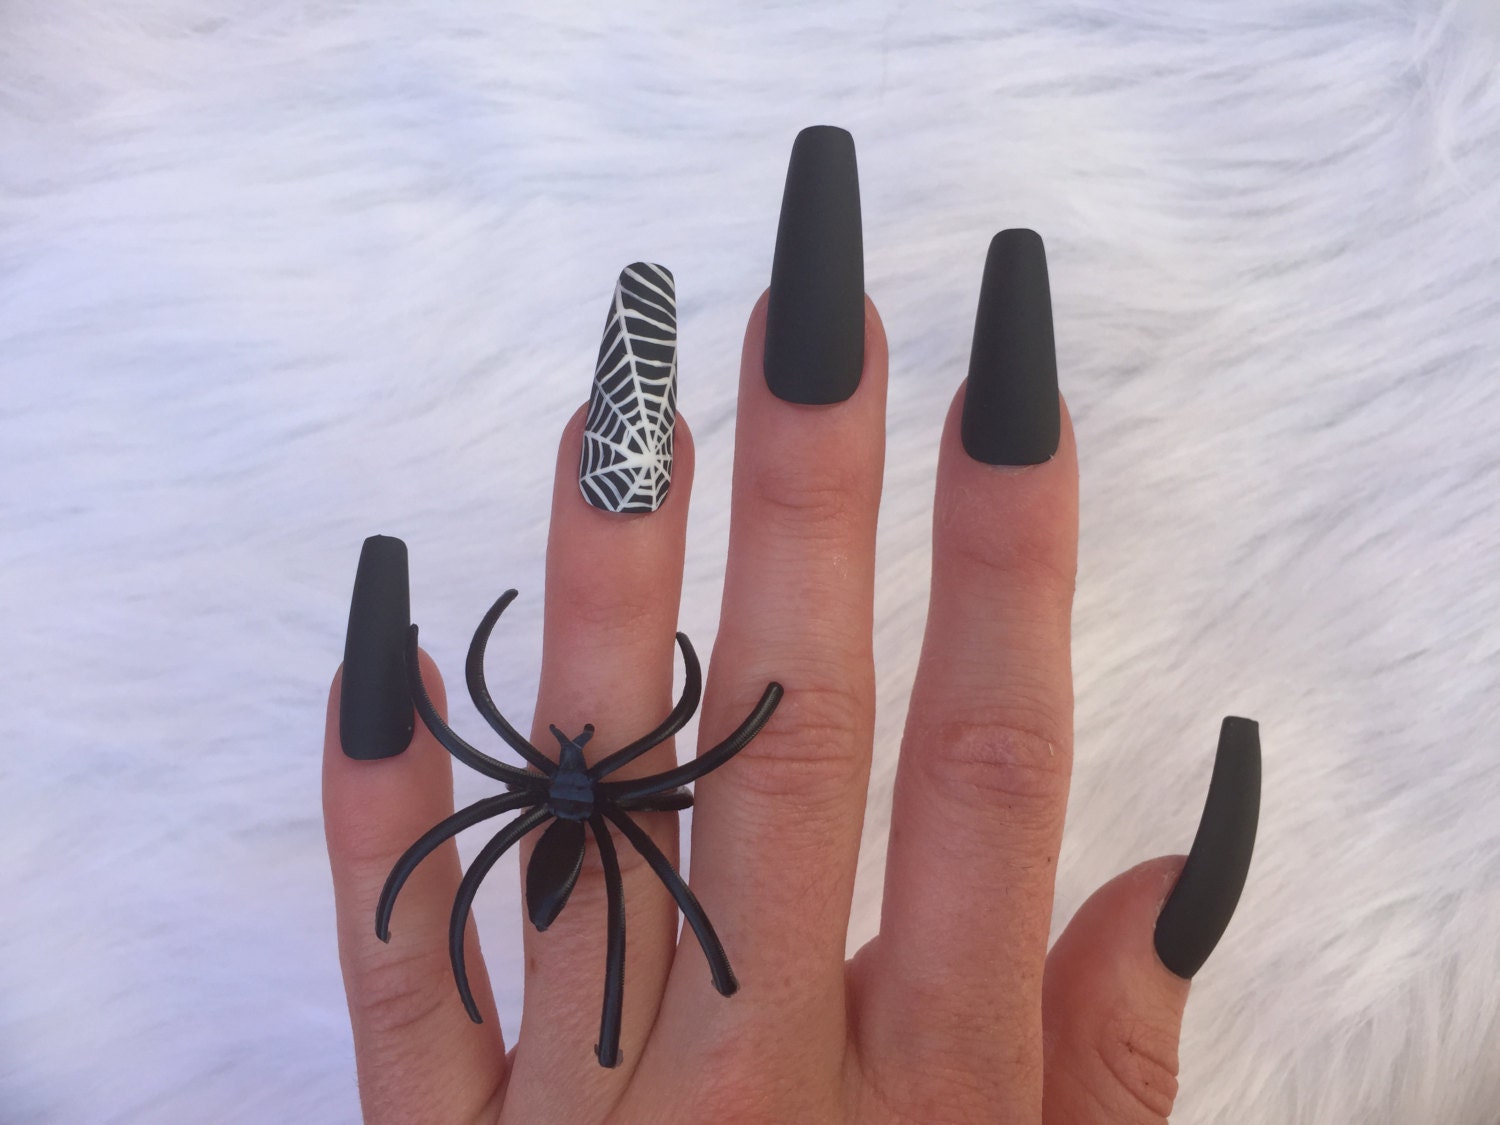 Matte Black Spiderweb nails set of 10 long coffin nails for